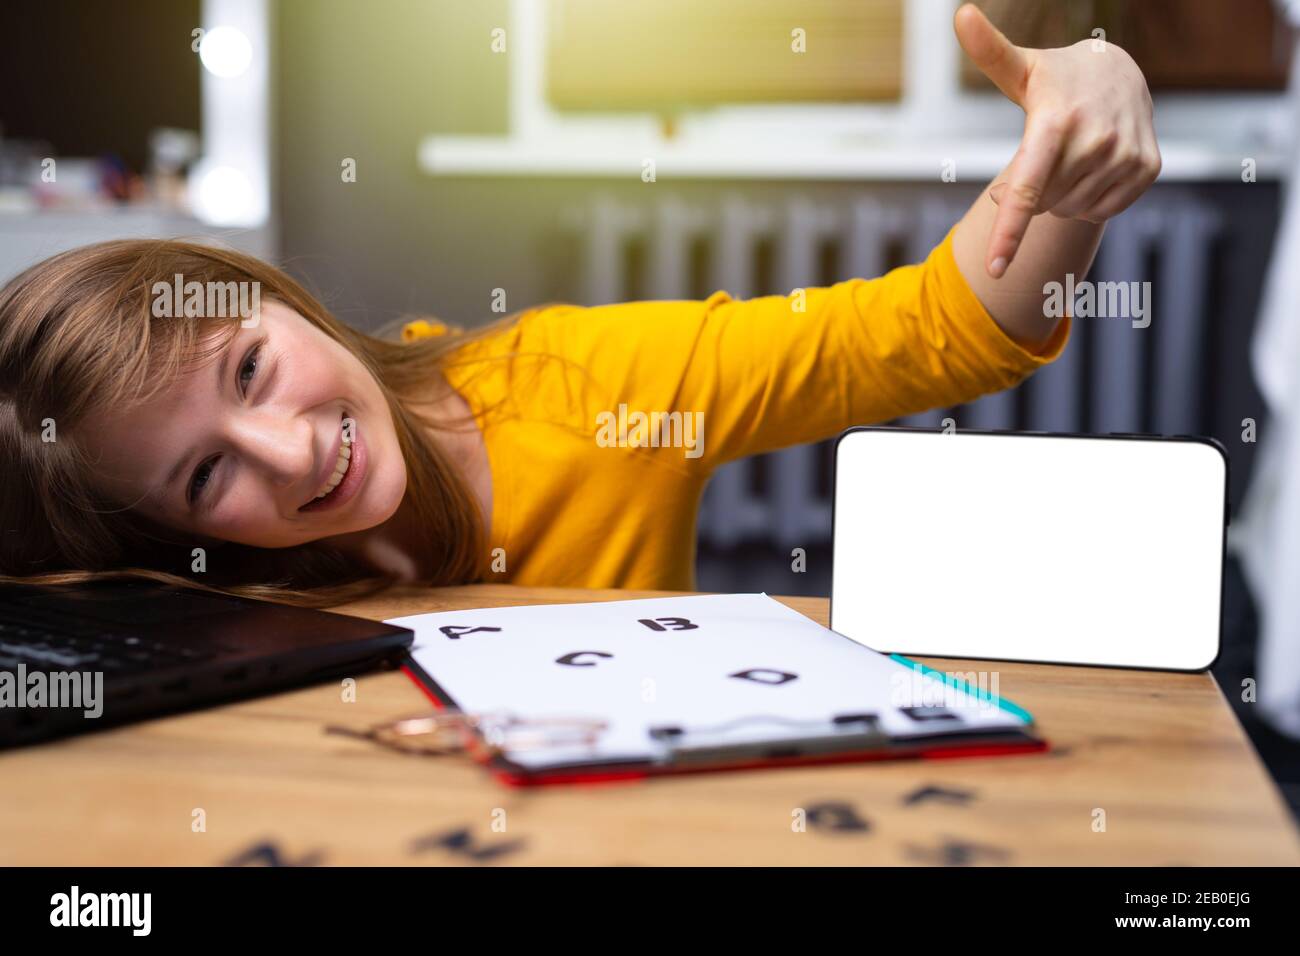 Online education concept. A young blonde girl shows a forefinger on a white sheet with black letters smiles and looks into the camera. Stock Photo